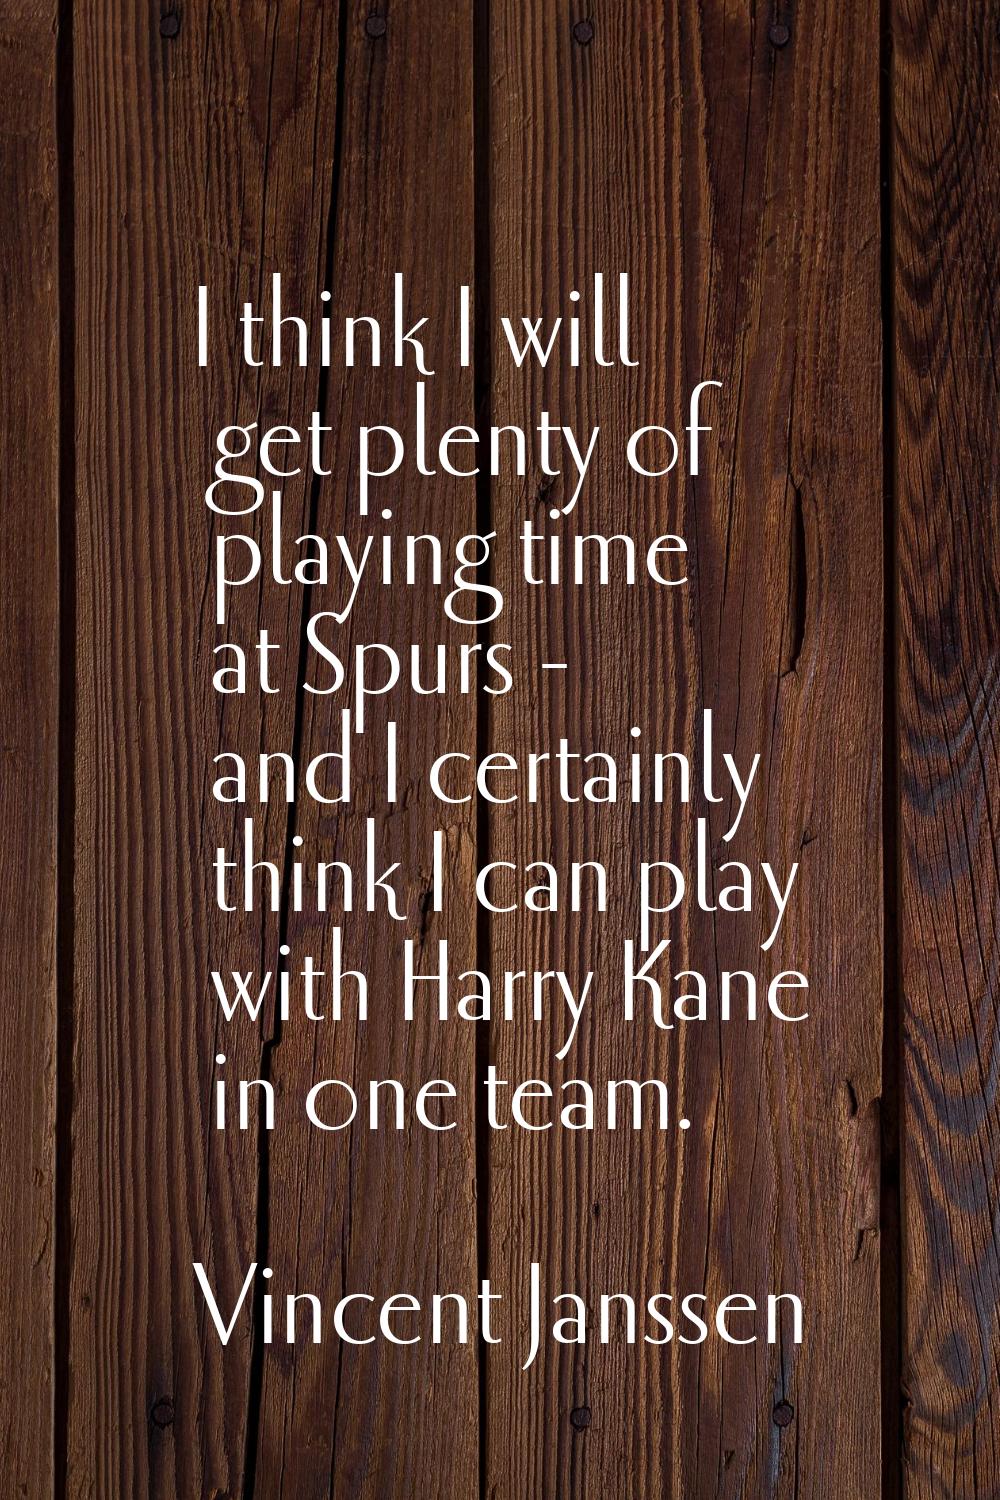 I think I will get plenty of playing time at Spurs - and I certainly think I can play with Harry Ka